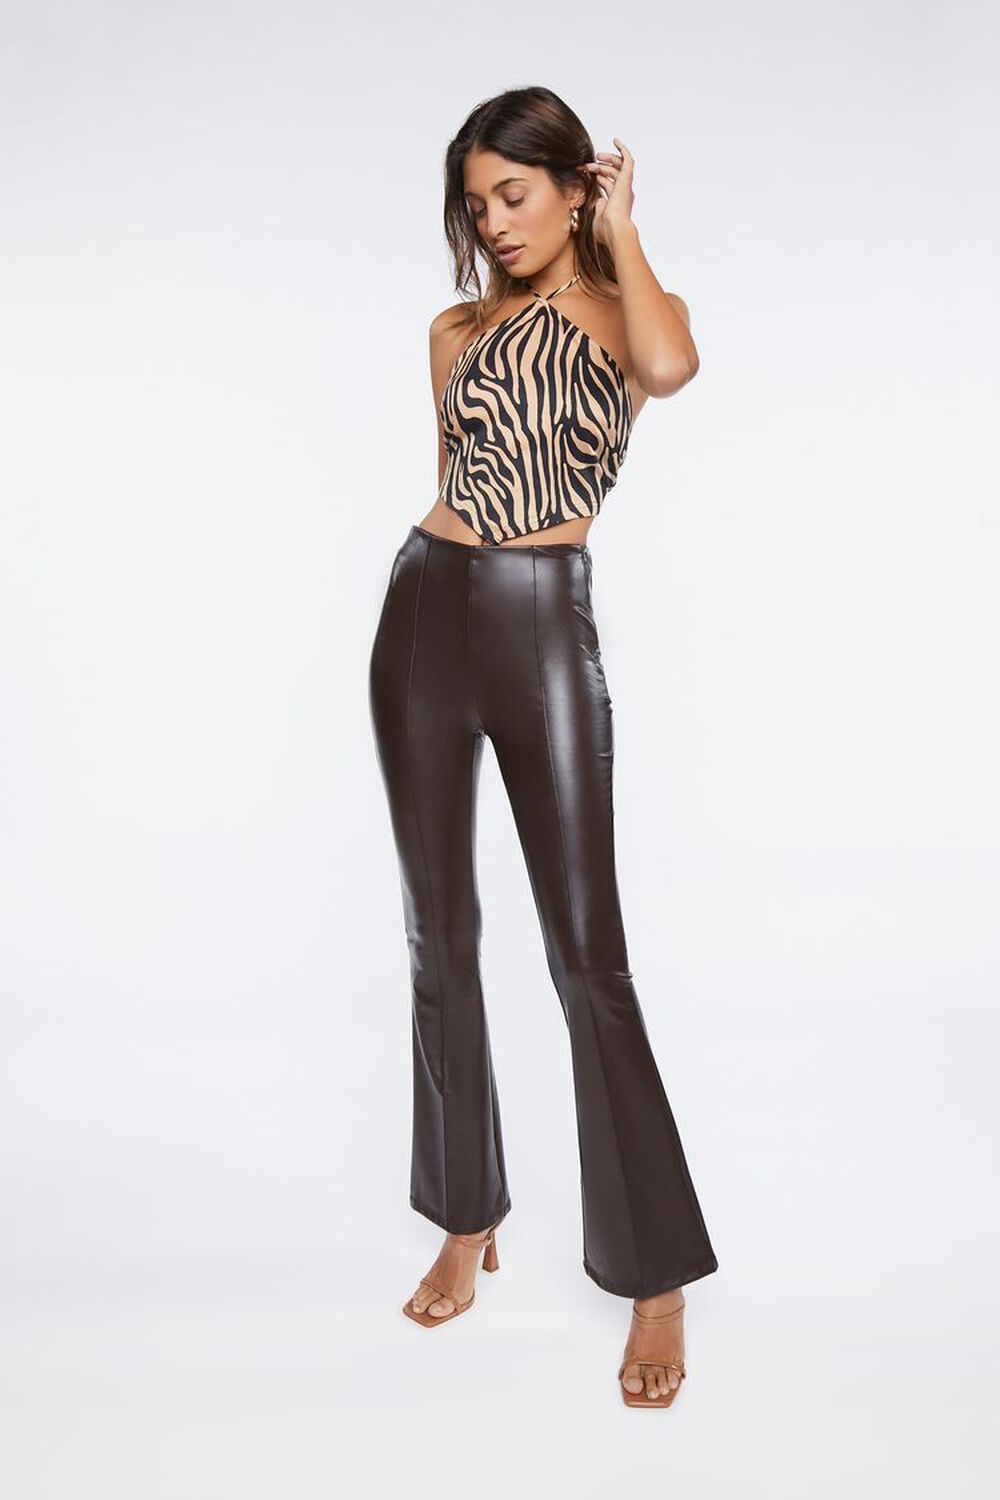 COFFEE Faux Leather High-Rise Flare Pants, image 1